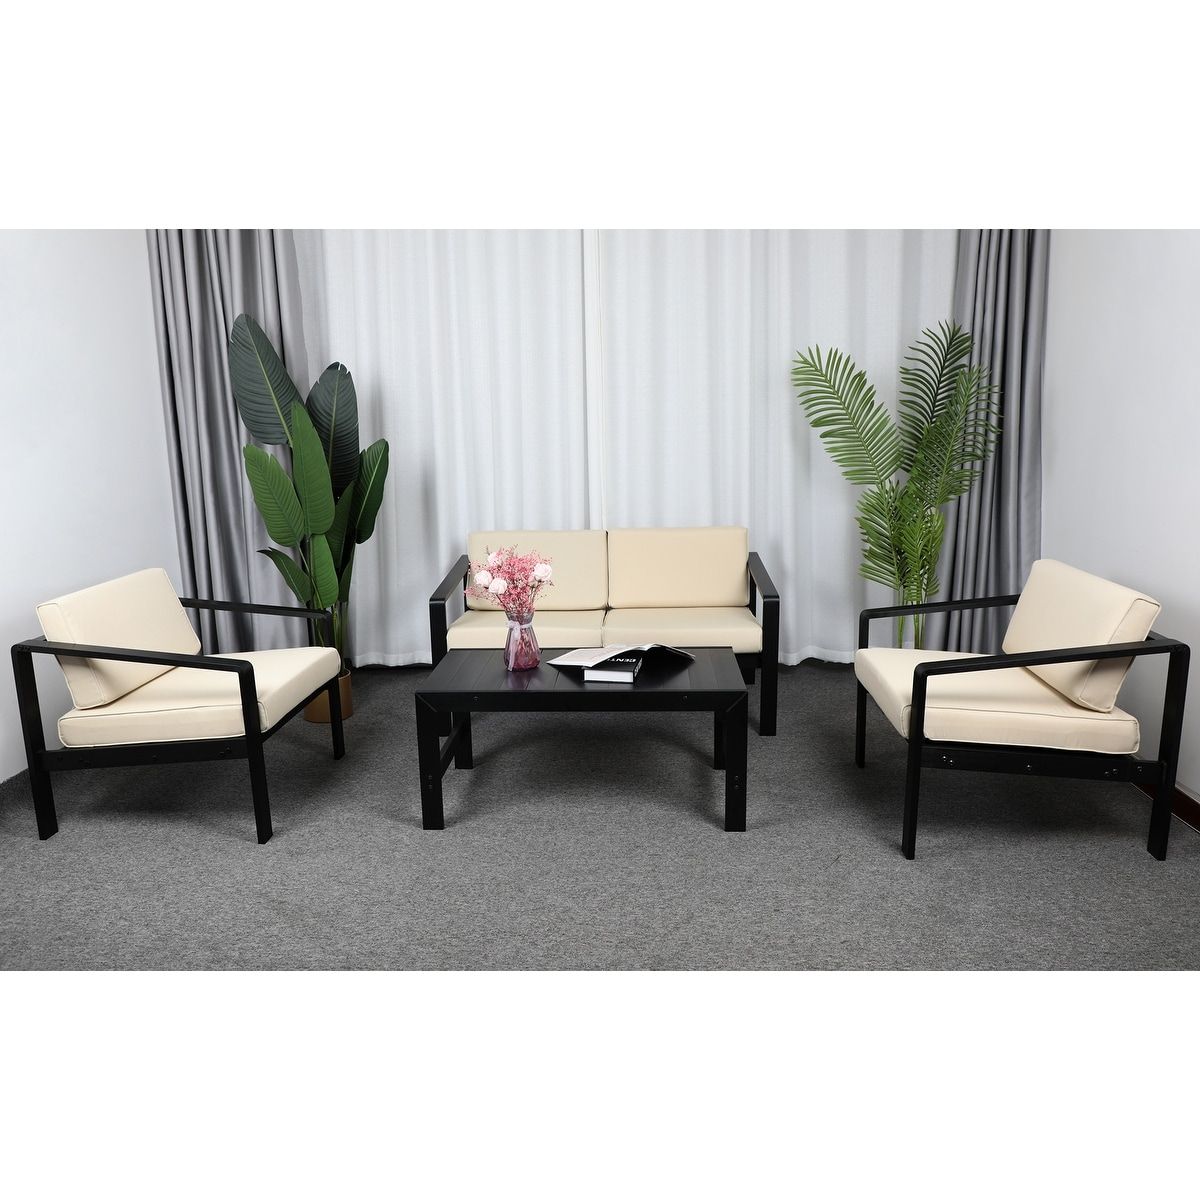 4 Piece Outdoor Furniture Set With Outdoor Waterproof Coffee Table – Bed  Bath & Beyond – 36334869 Pertaining To Waterproof Coffee Tables (View 11 of 15)